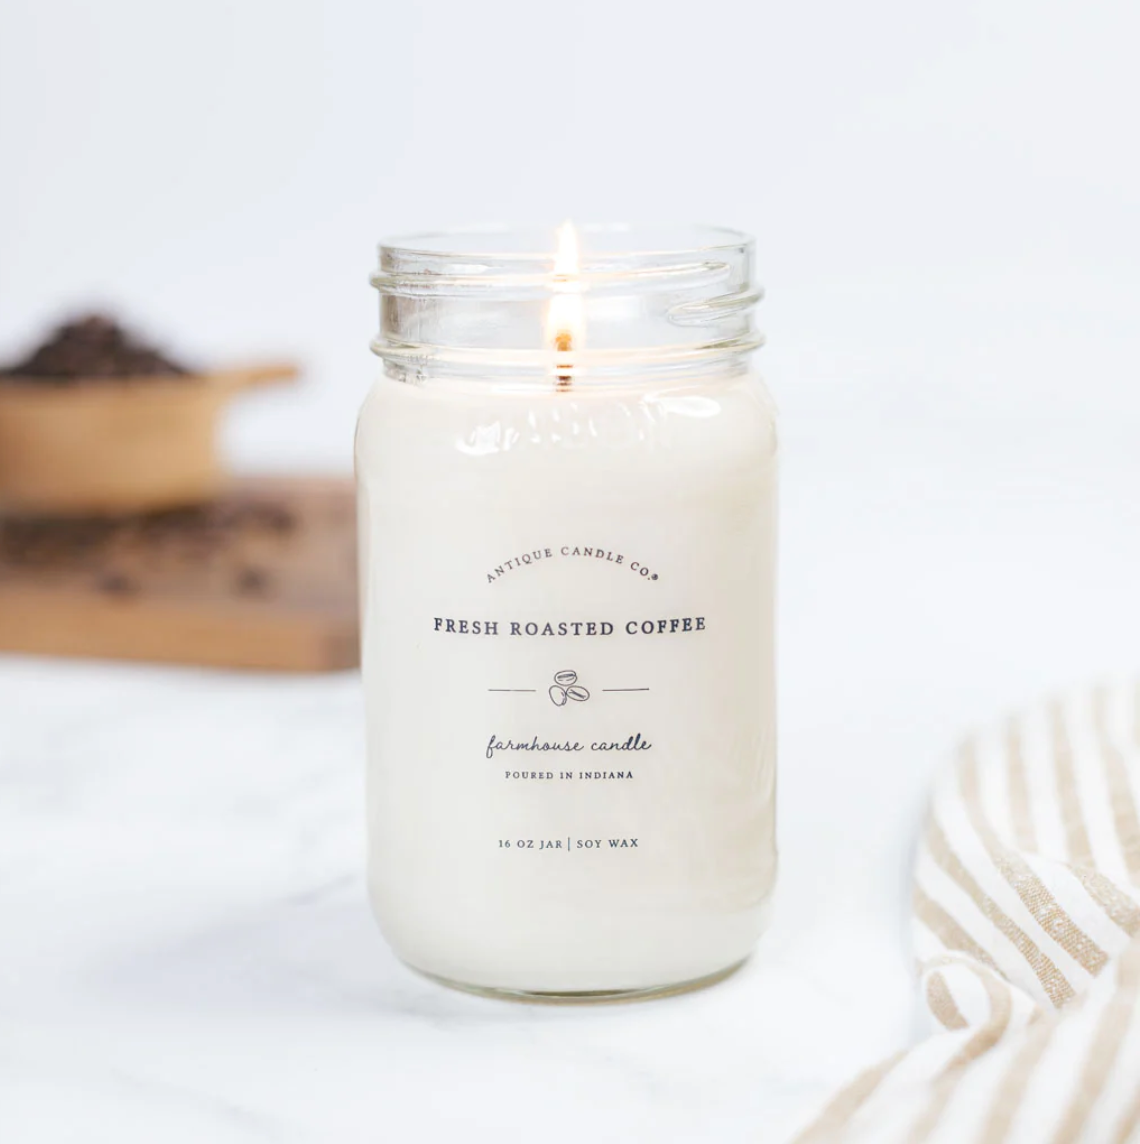 Cocoa Butter Beeswax Candle in a Vintage Crock - Farmhouse on Boone